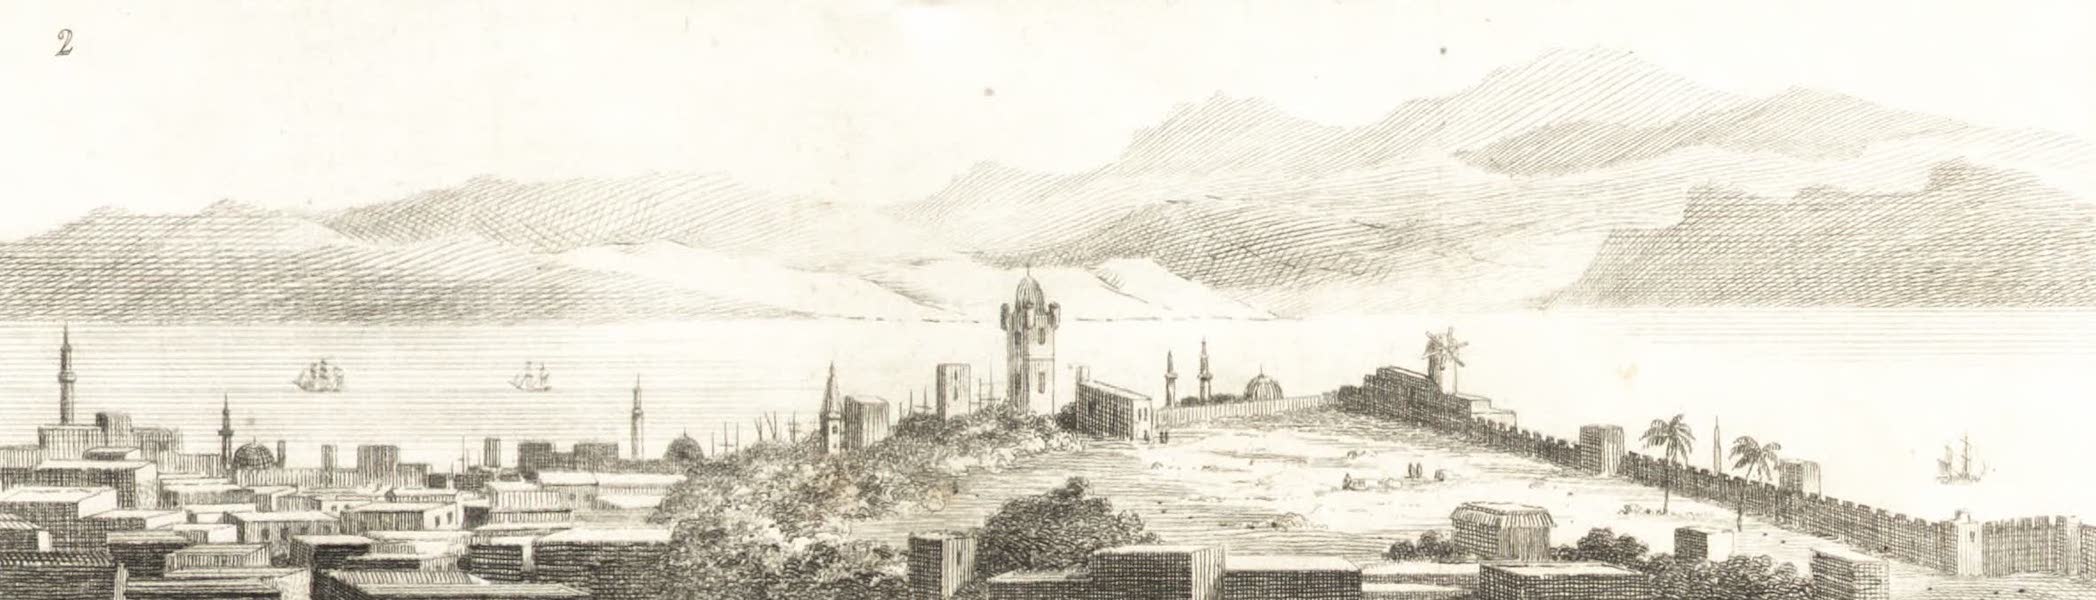 Journal of a Tour in the Levant Vol. 3 - Rhodes (1820)